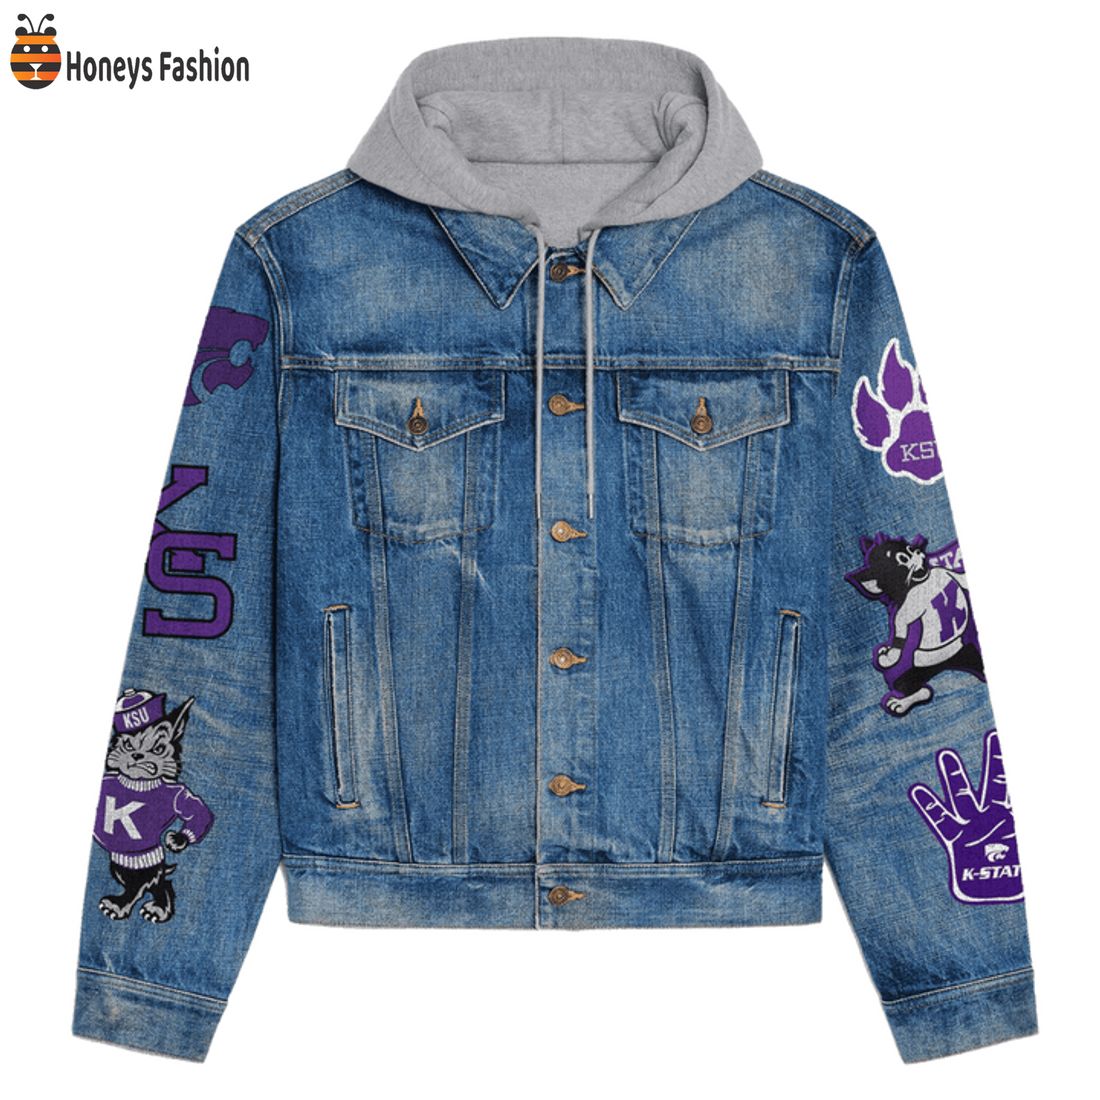 NEW Kansas State Wildcats Nation Emaw Smash Mouth Hooded Denim Jacket